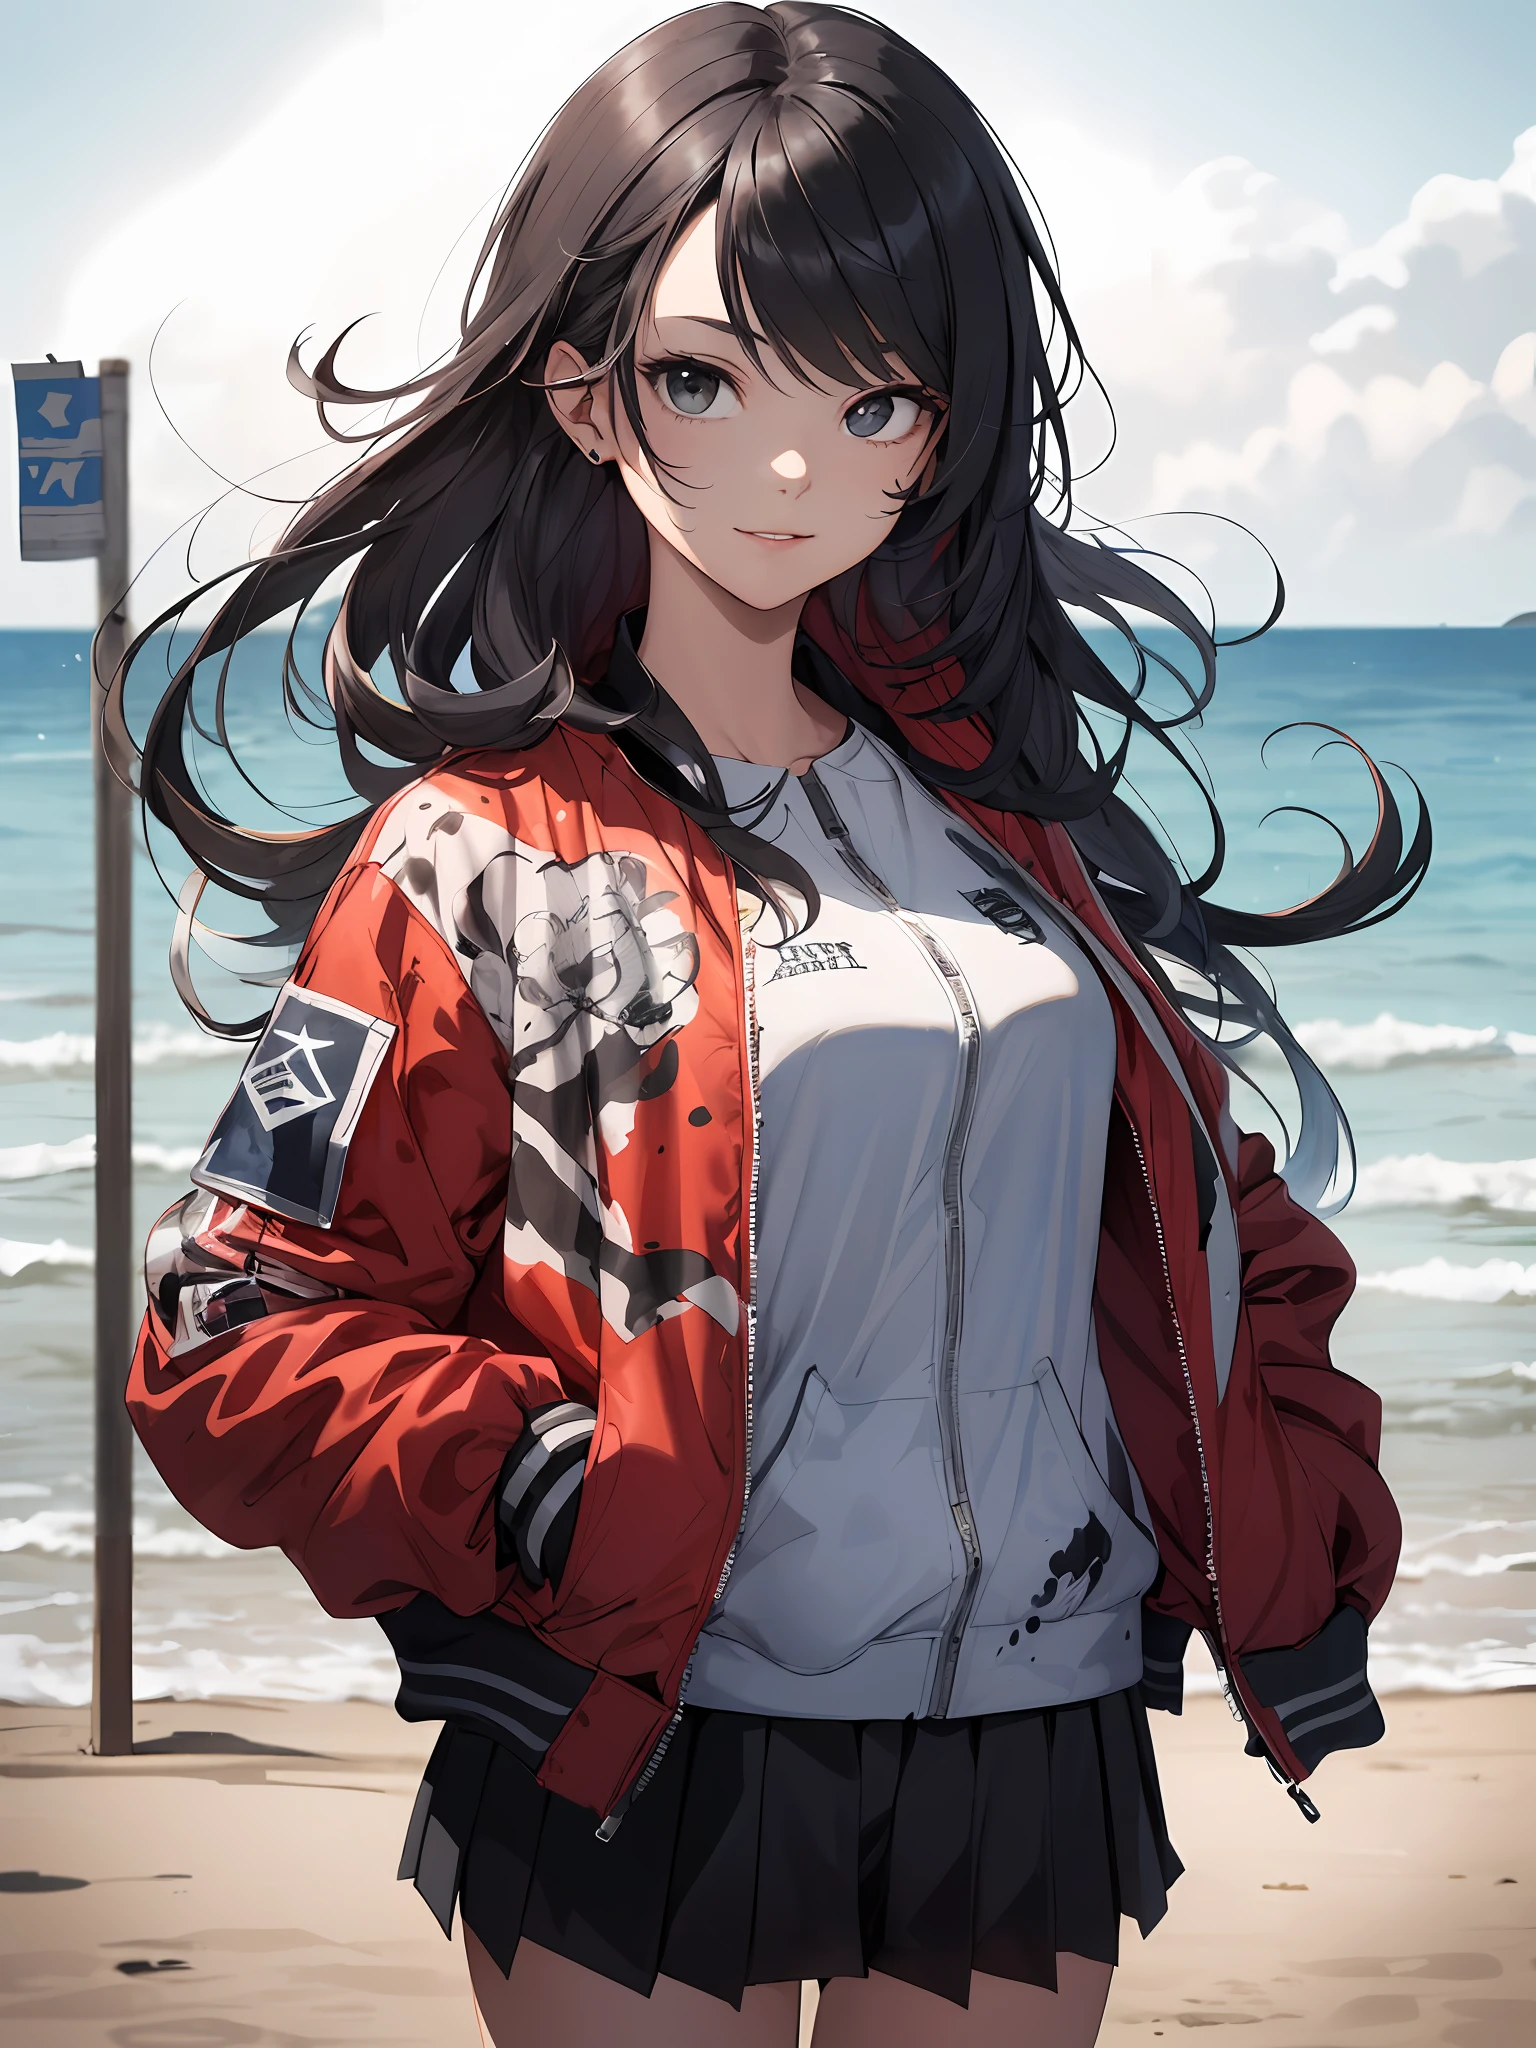 soro woman,(best texture:1.3),UHD,( 1woman , Breezy Beach:1.5),Japanese woman, absurdreasterpiece)), ((best quality)), (ultra-detailed), ((extremely detailed)),high definition,an extremely delicate and beautiful,((best quality)),,colorful,(very long (red) oversized bomber jackett:1.3), (beautiful detailed school uniform), military boots,,((extremely detailed)), 4K, (8K),best quality,, illustration,(ink splash:1.6),(pencil drawing:1.3), (watercolor pencil2:1.6 ),, (beautiful),((perfect face,perfect body,perfect anatomy)),((so cool)), cute, brake, 20years old,full body, smile,( extra long hair:1.3), (bluish black hair:1.3), straight hair, hime cut, (tilted eyes:1.3), (black eyes:1.4), (tall stature), athlete, slender body, small brest, ((cool face)), ((slender face)), expression fair skin, She has a beautiful face and shining eyes,